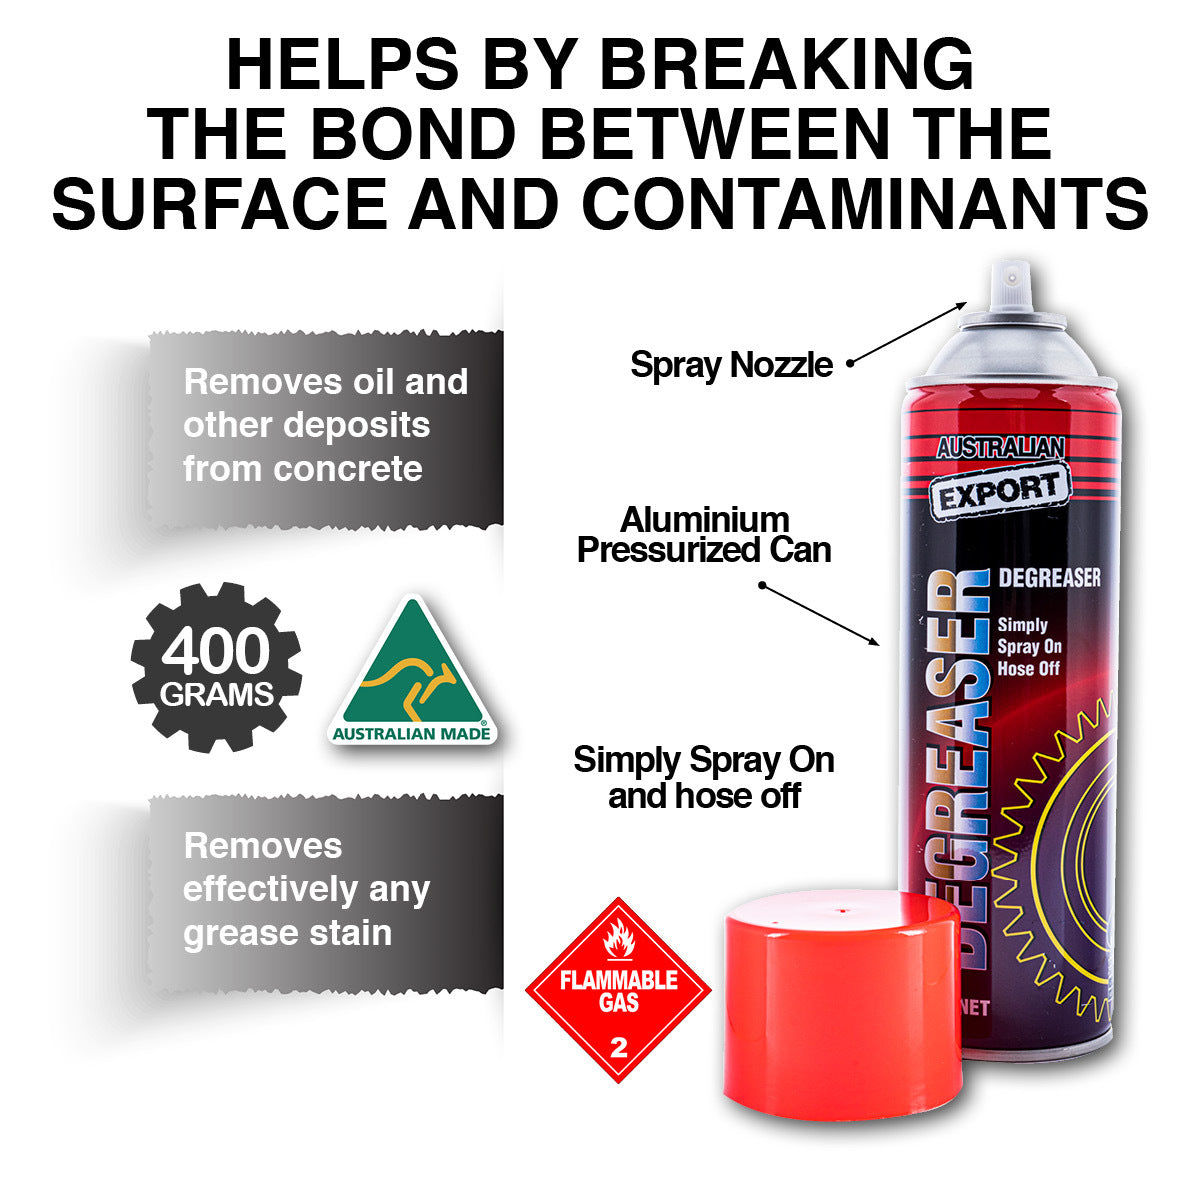 Australian Export 12PCE Degreaser Powerful Grease Oil Mechanical Concrete 400gm